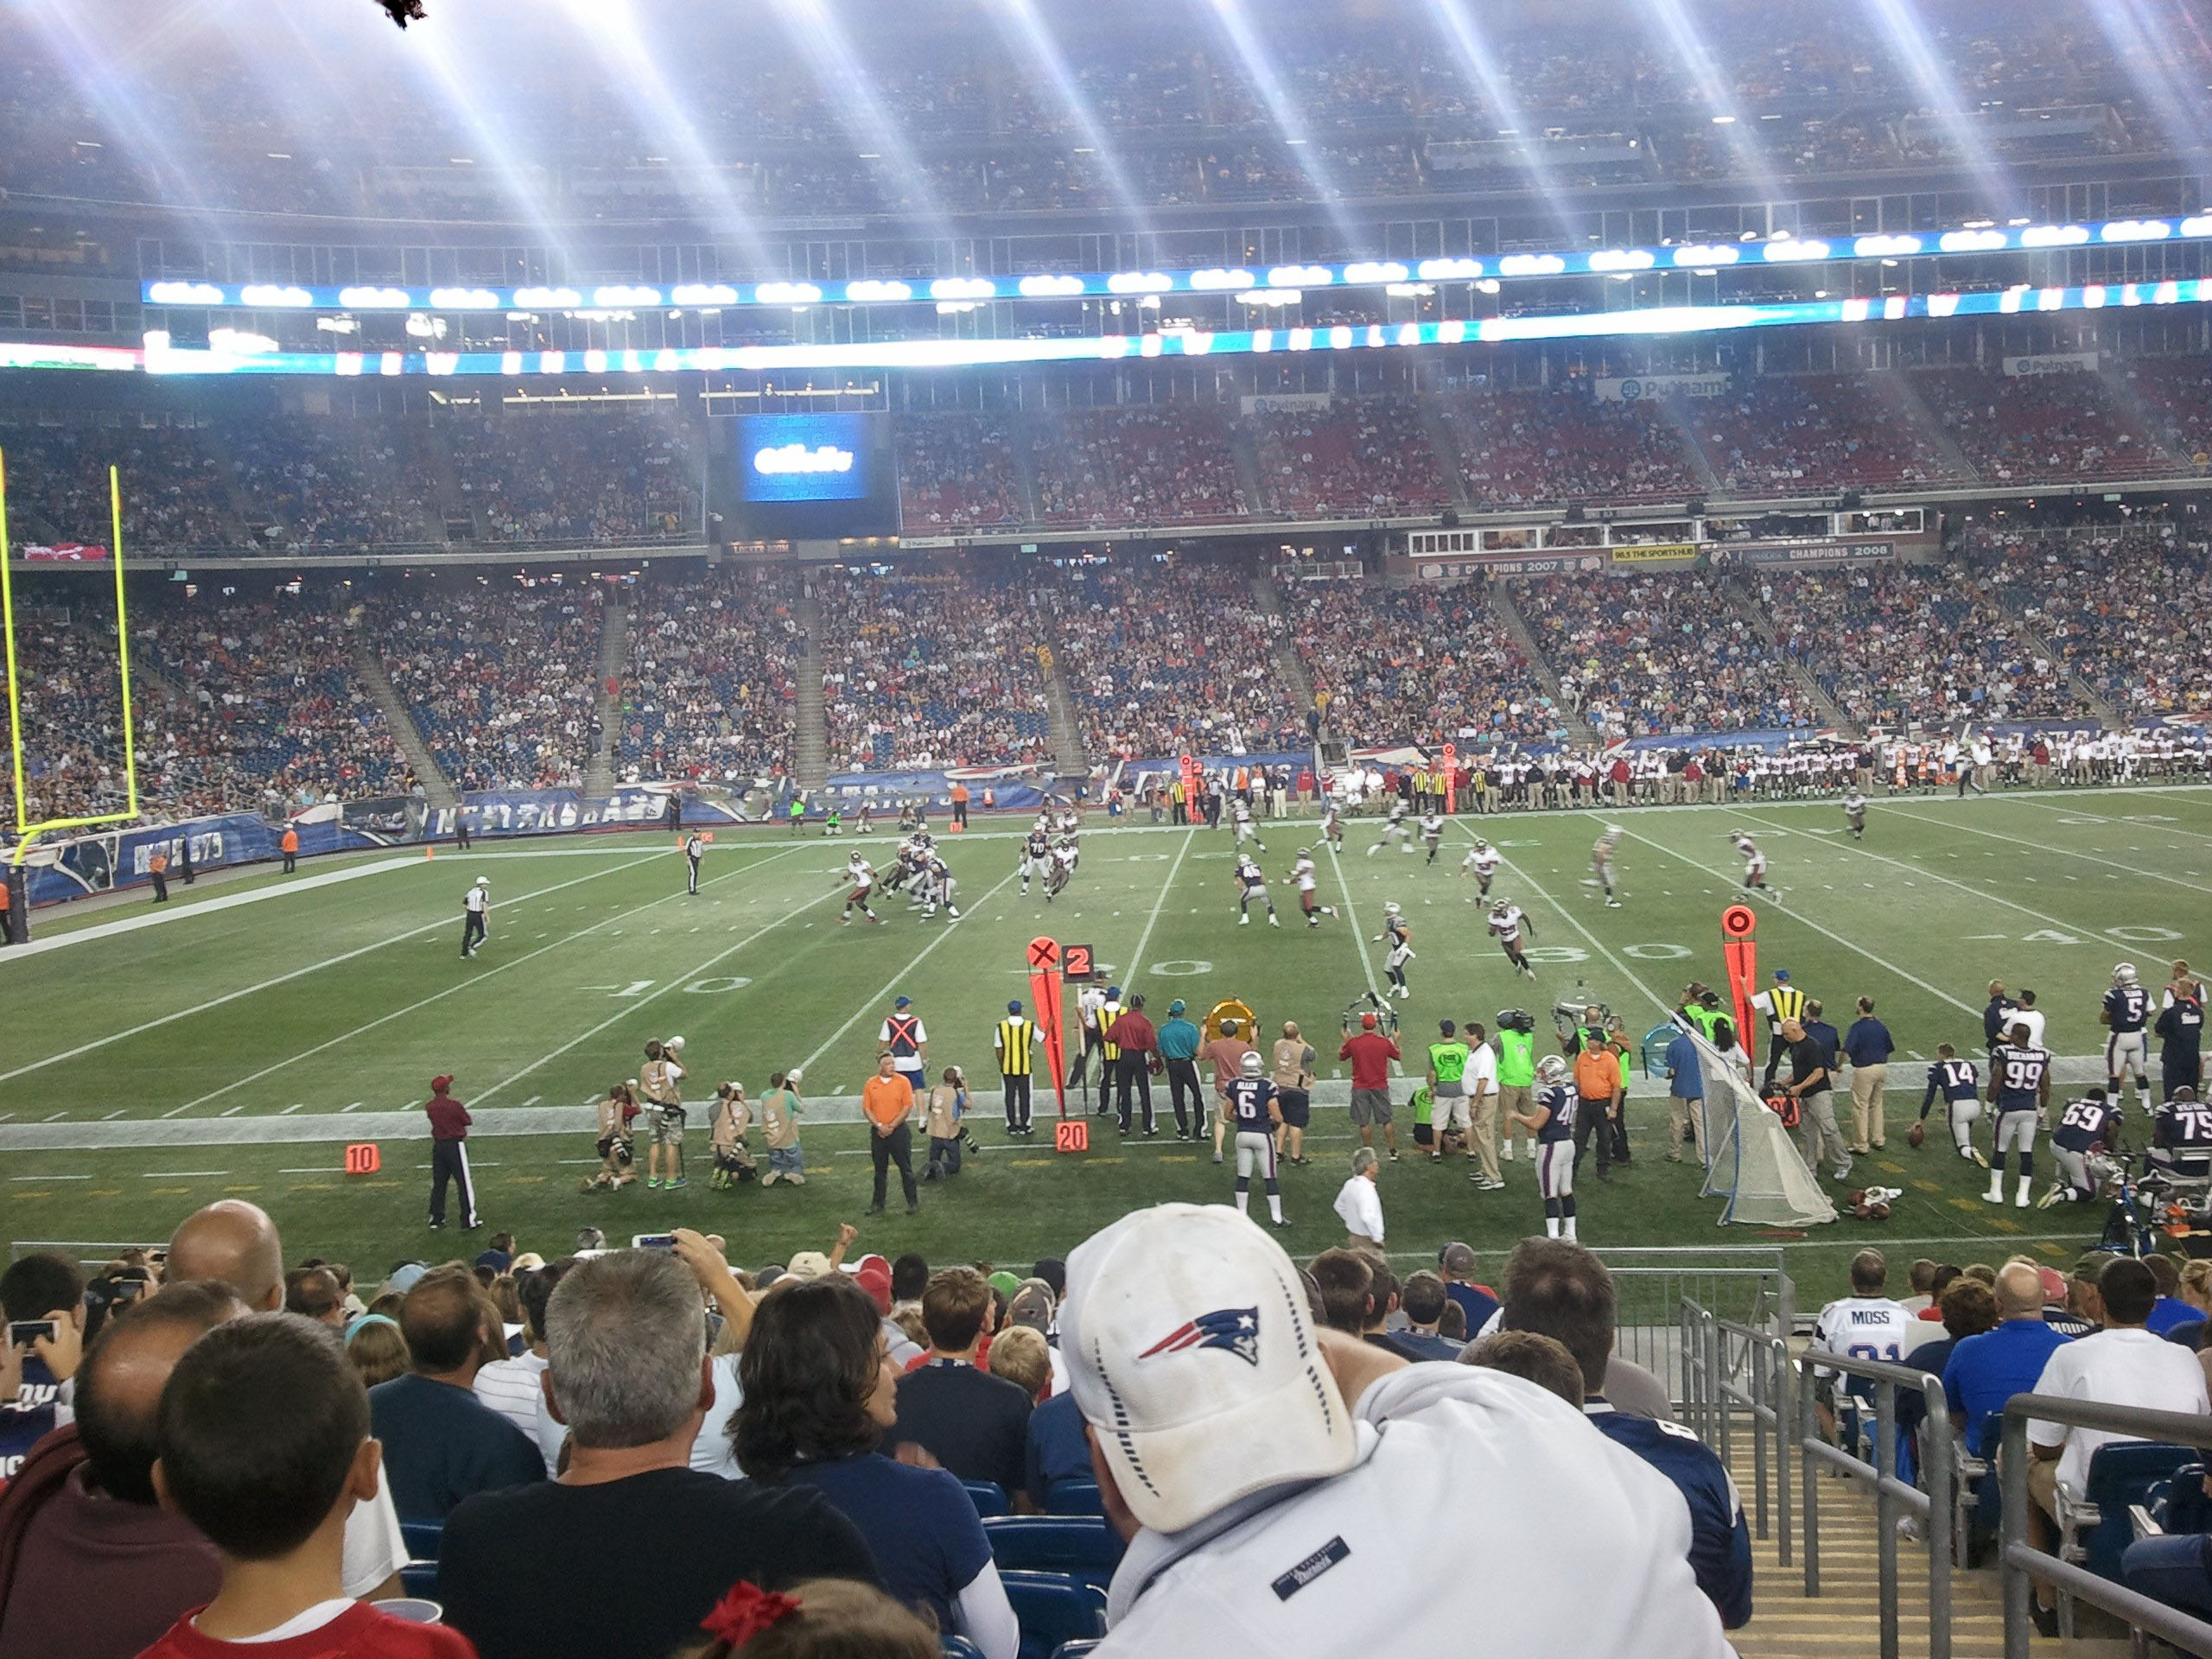 section 112, row 18 seat view  for football - gillette stadium